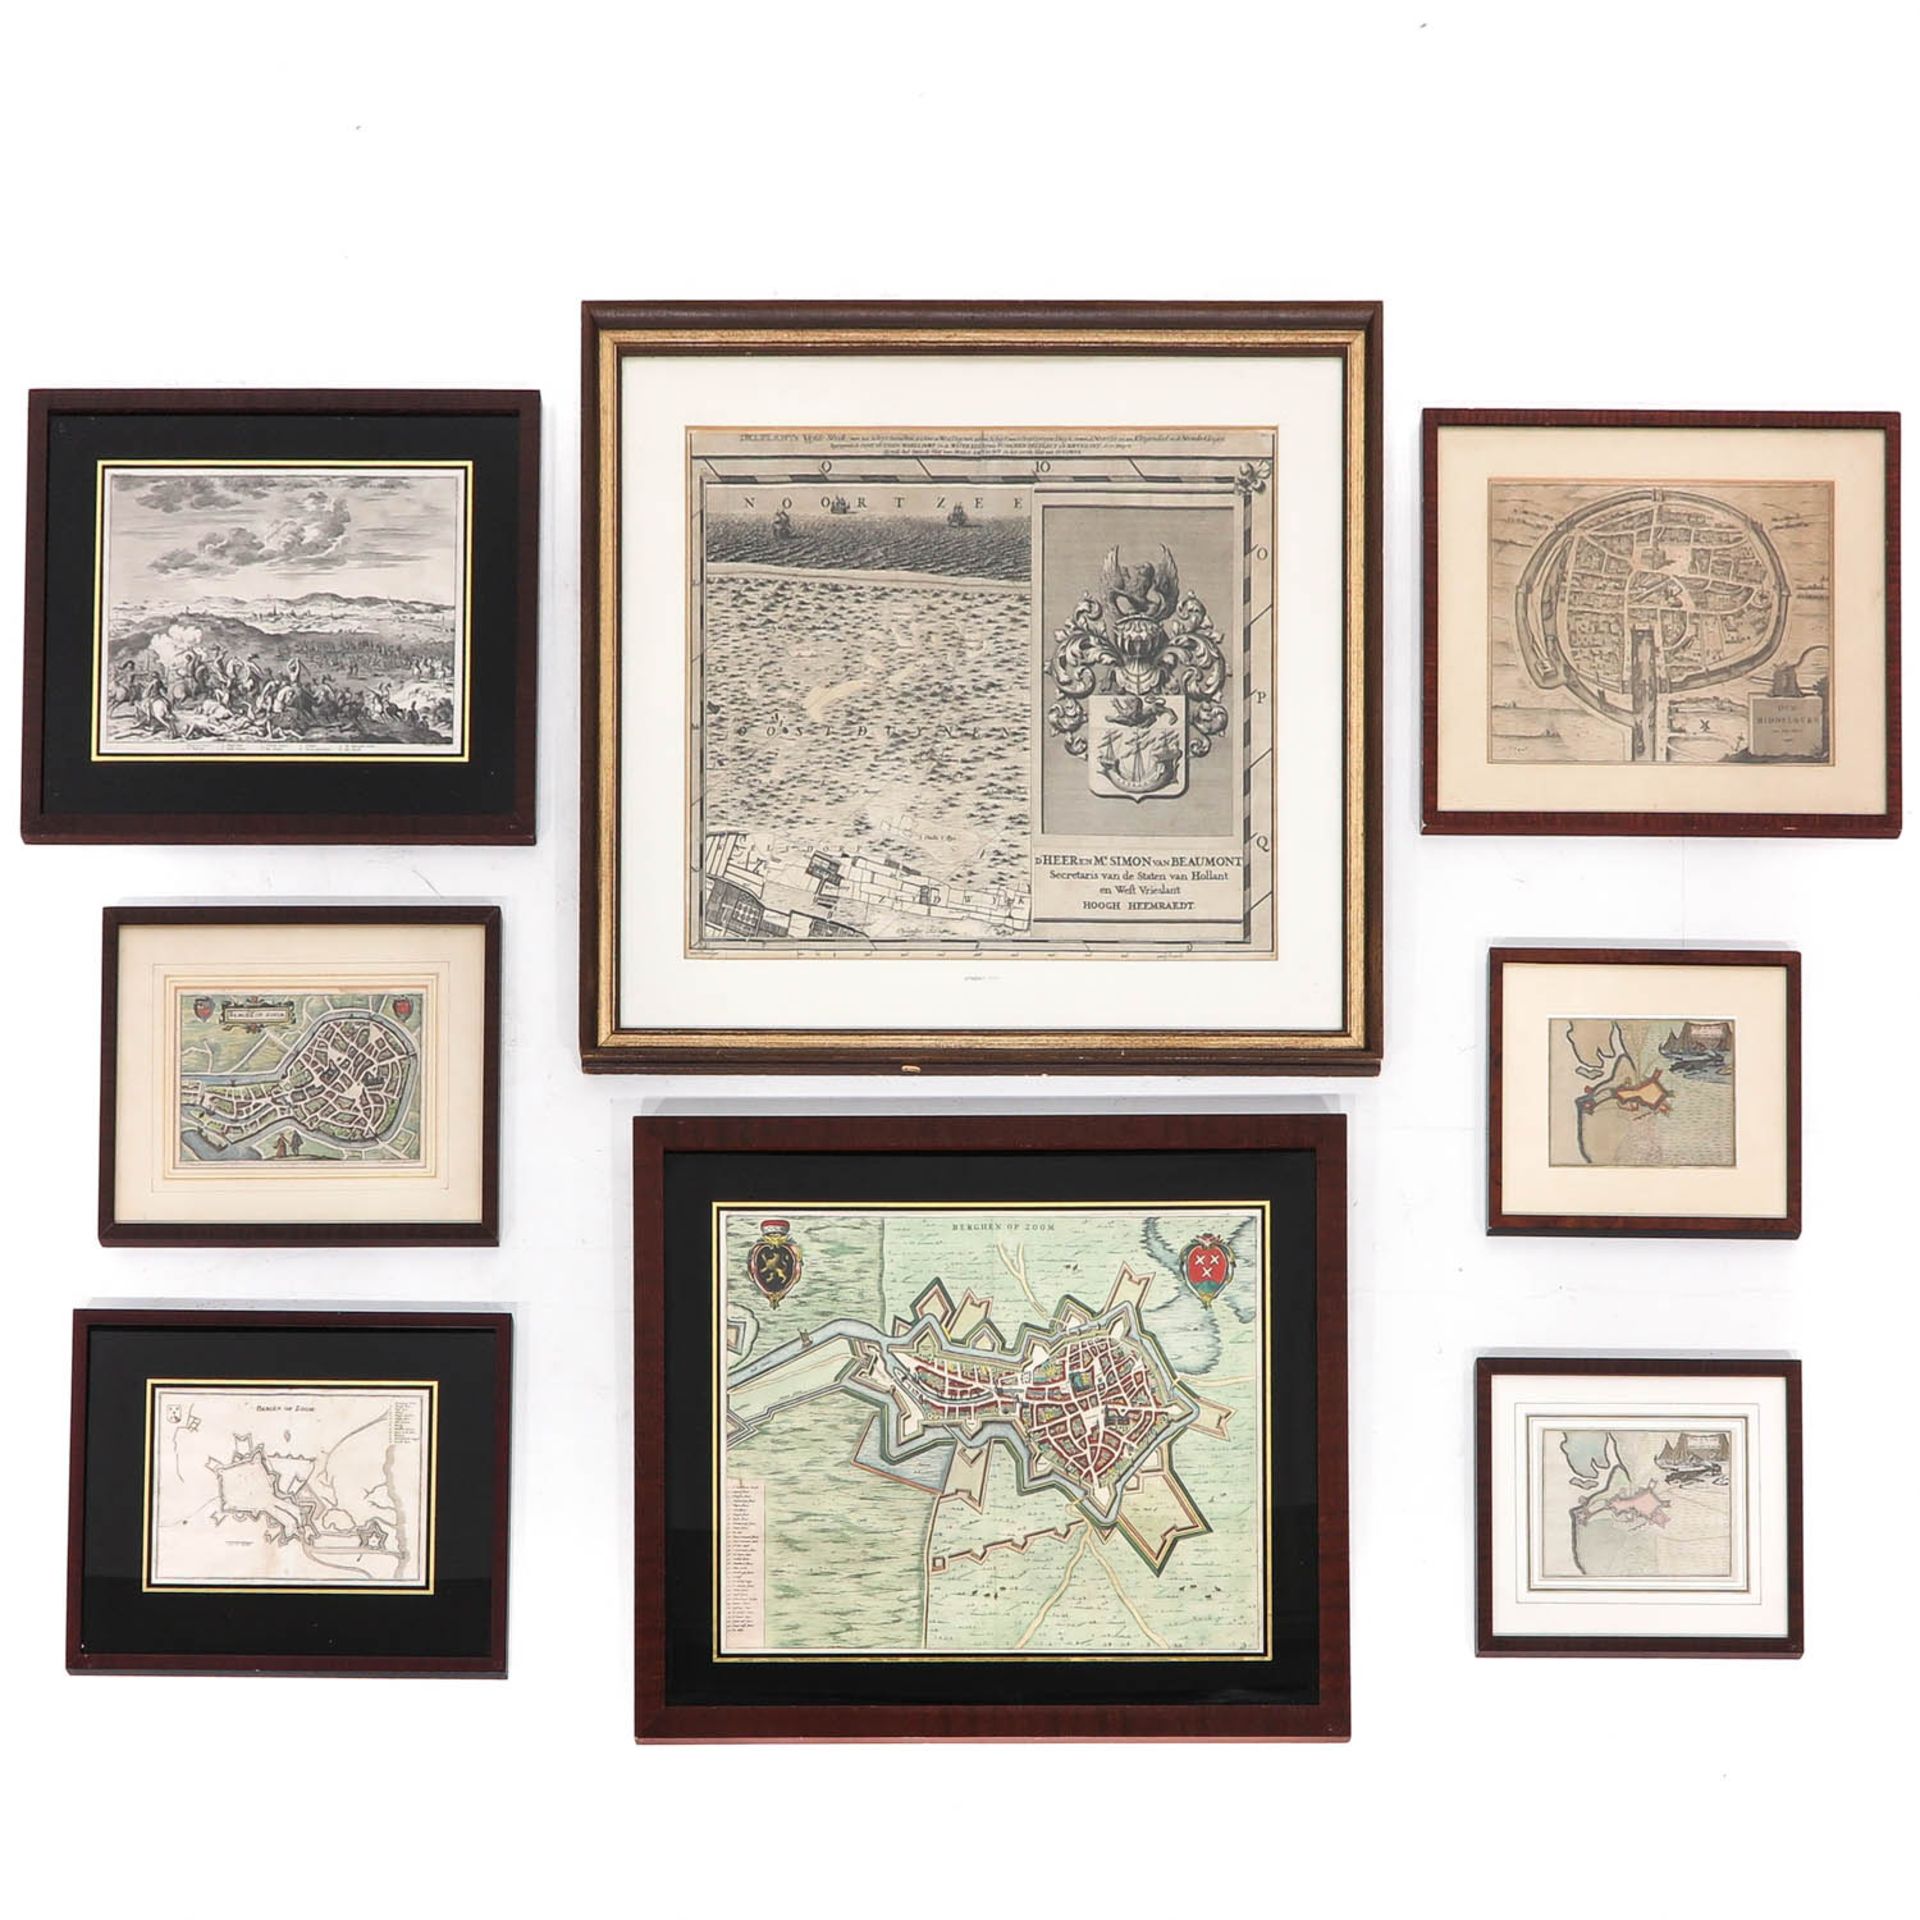 A Collection of 8 Prints and Etchings